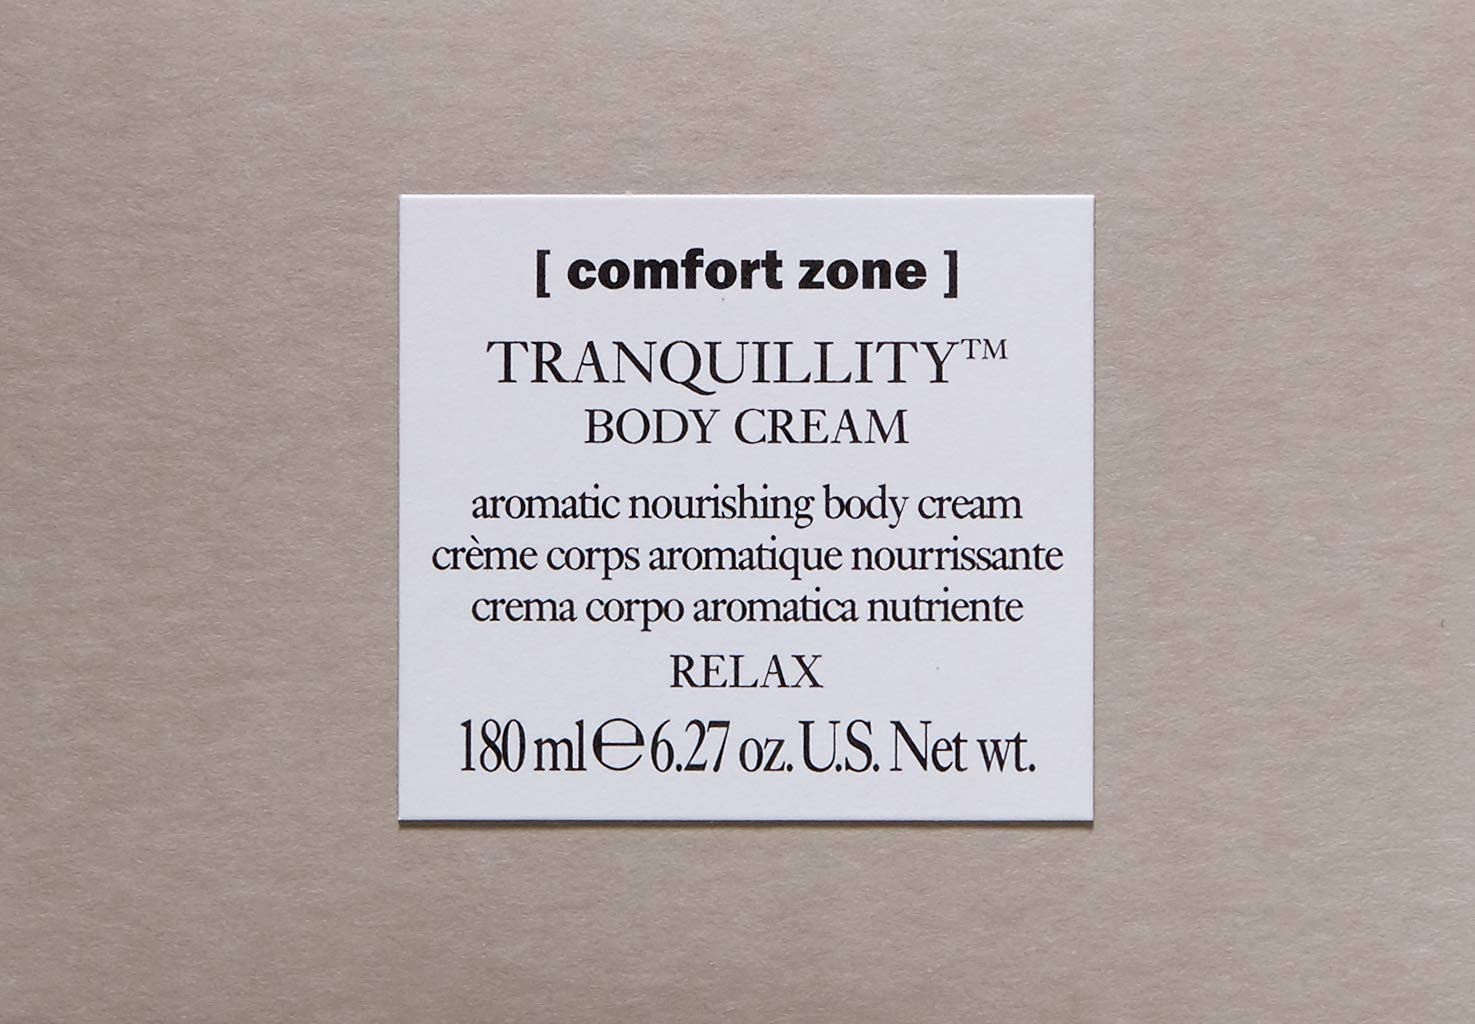 [ comfort zone ] Tranquillity Aromatic, Nourishing Body Cream, Warm And Woody With Light Notes of Vanilla and Citrus, 6.27 Oz.